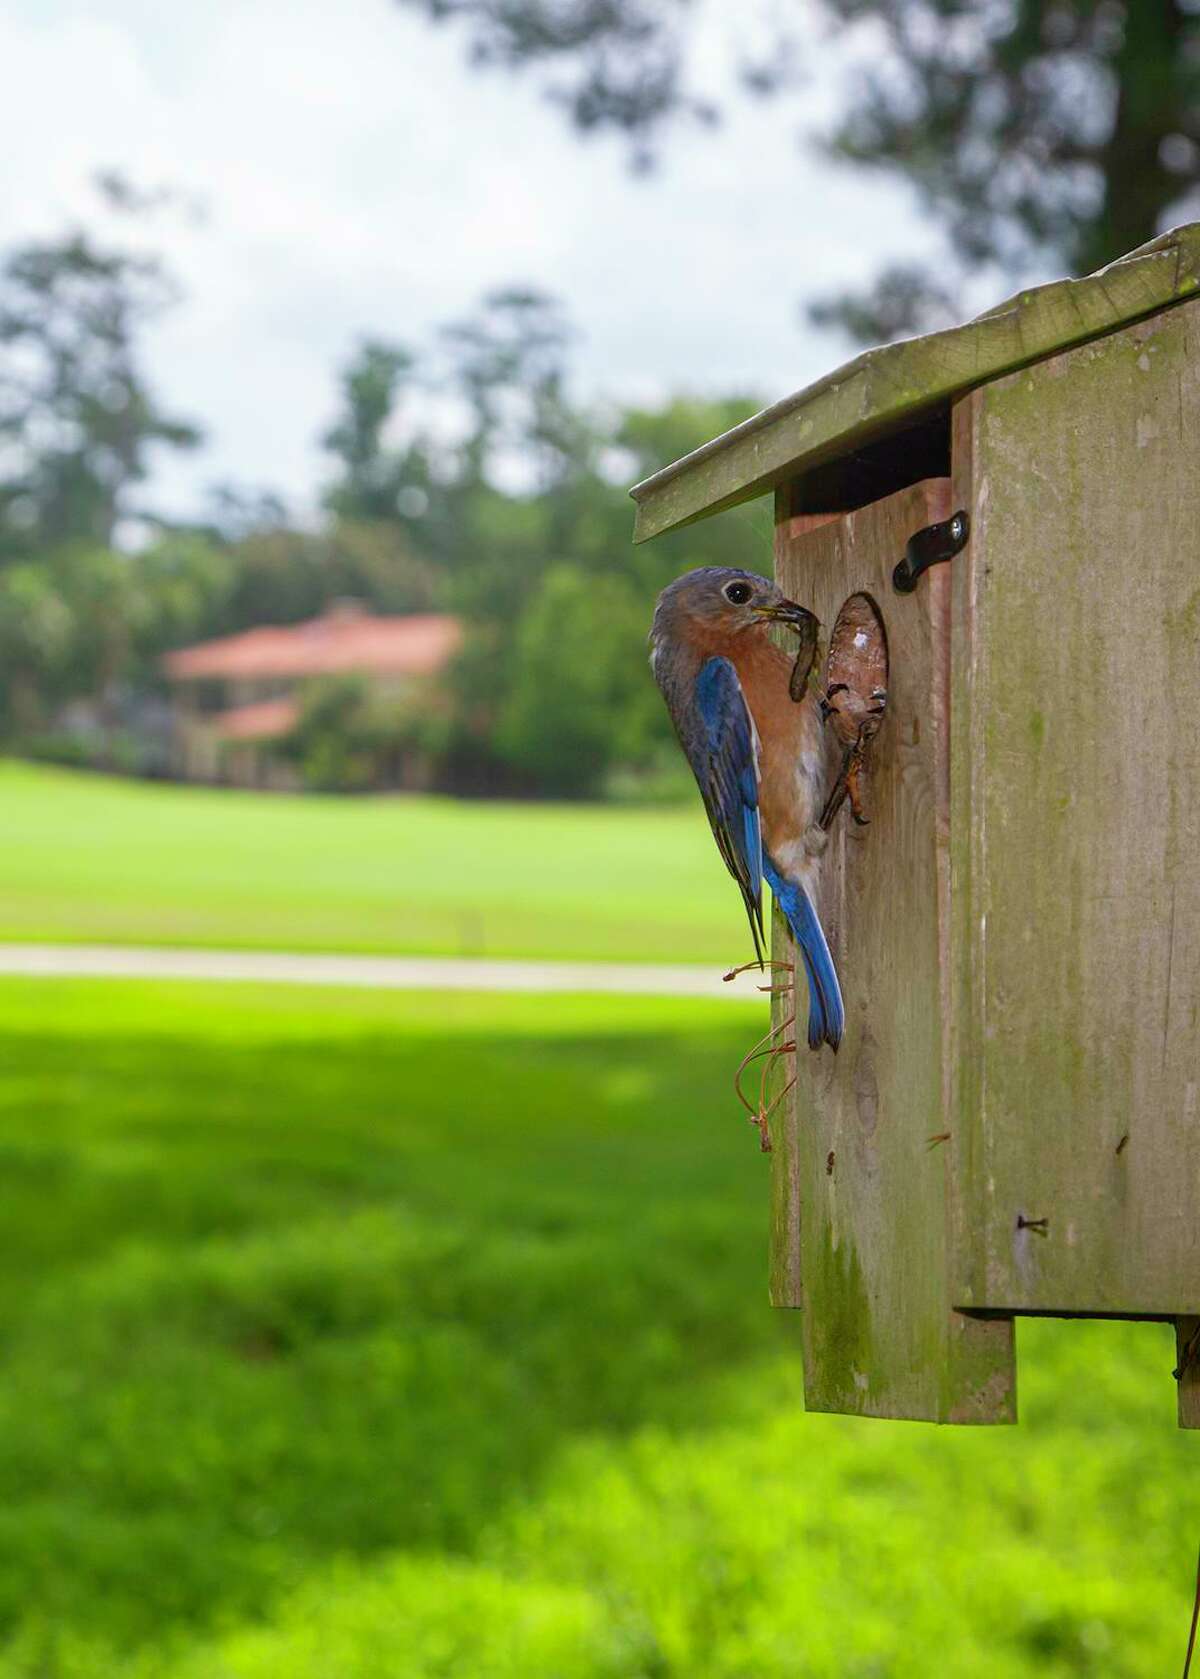 Eastern bluebird populations have been thriving thanks to the proliferation of bluebird nest boxes.